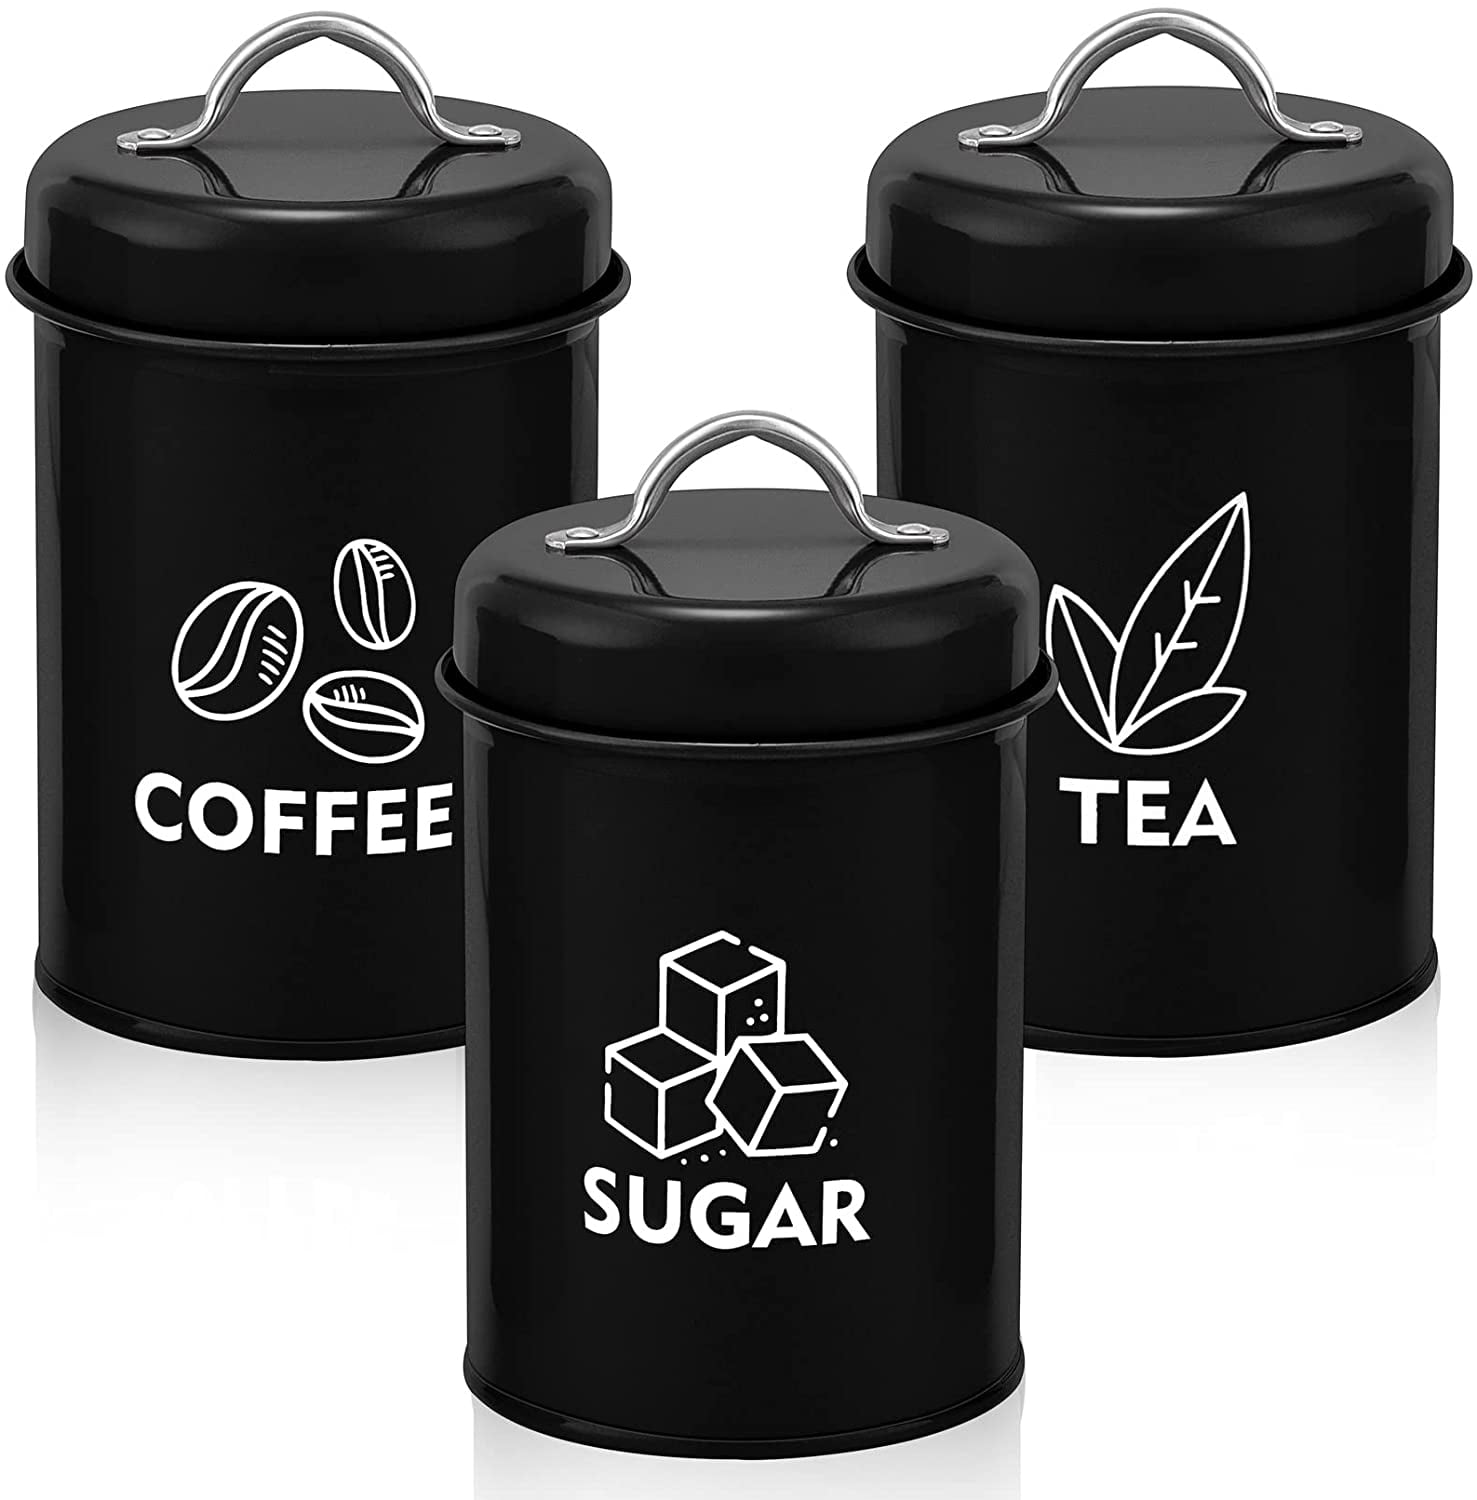 Mixpresso 3 Piece Black Canisters Sets For The Kitchen, Kitchen Jars With  See Window, Airtight Coffee Container Tea Organizer & Sugar Canister,  Kitchen Canisters Set of 3 Black Kitchen Decor price in